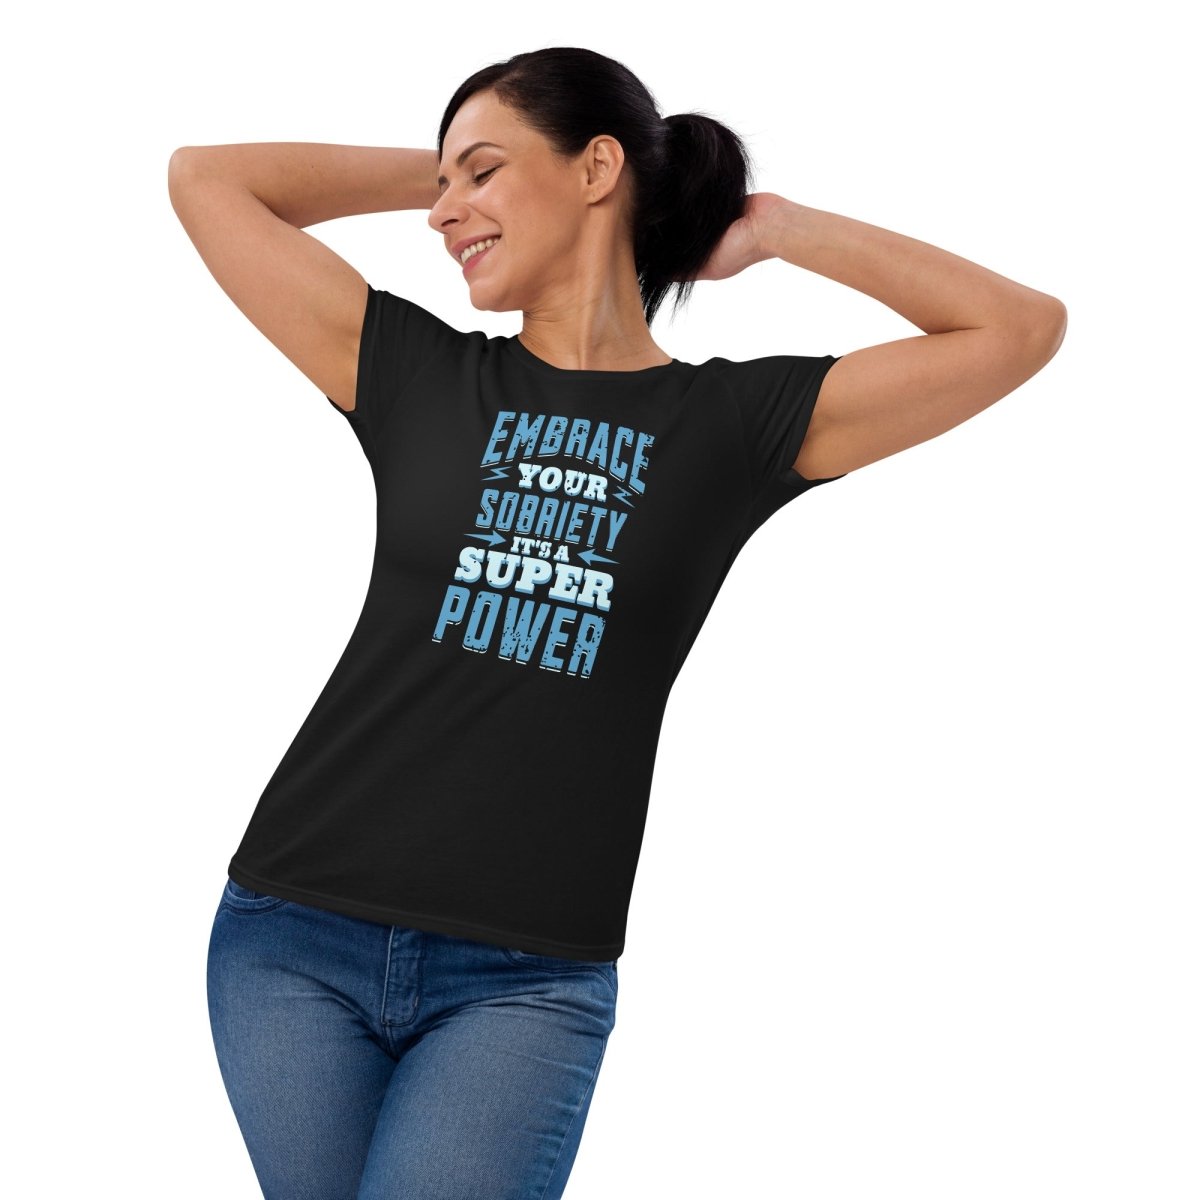 "Embrace Your Sobriety: It's a Superpower" Women's Tee - | Sobervation